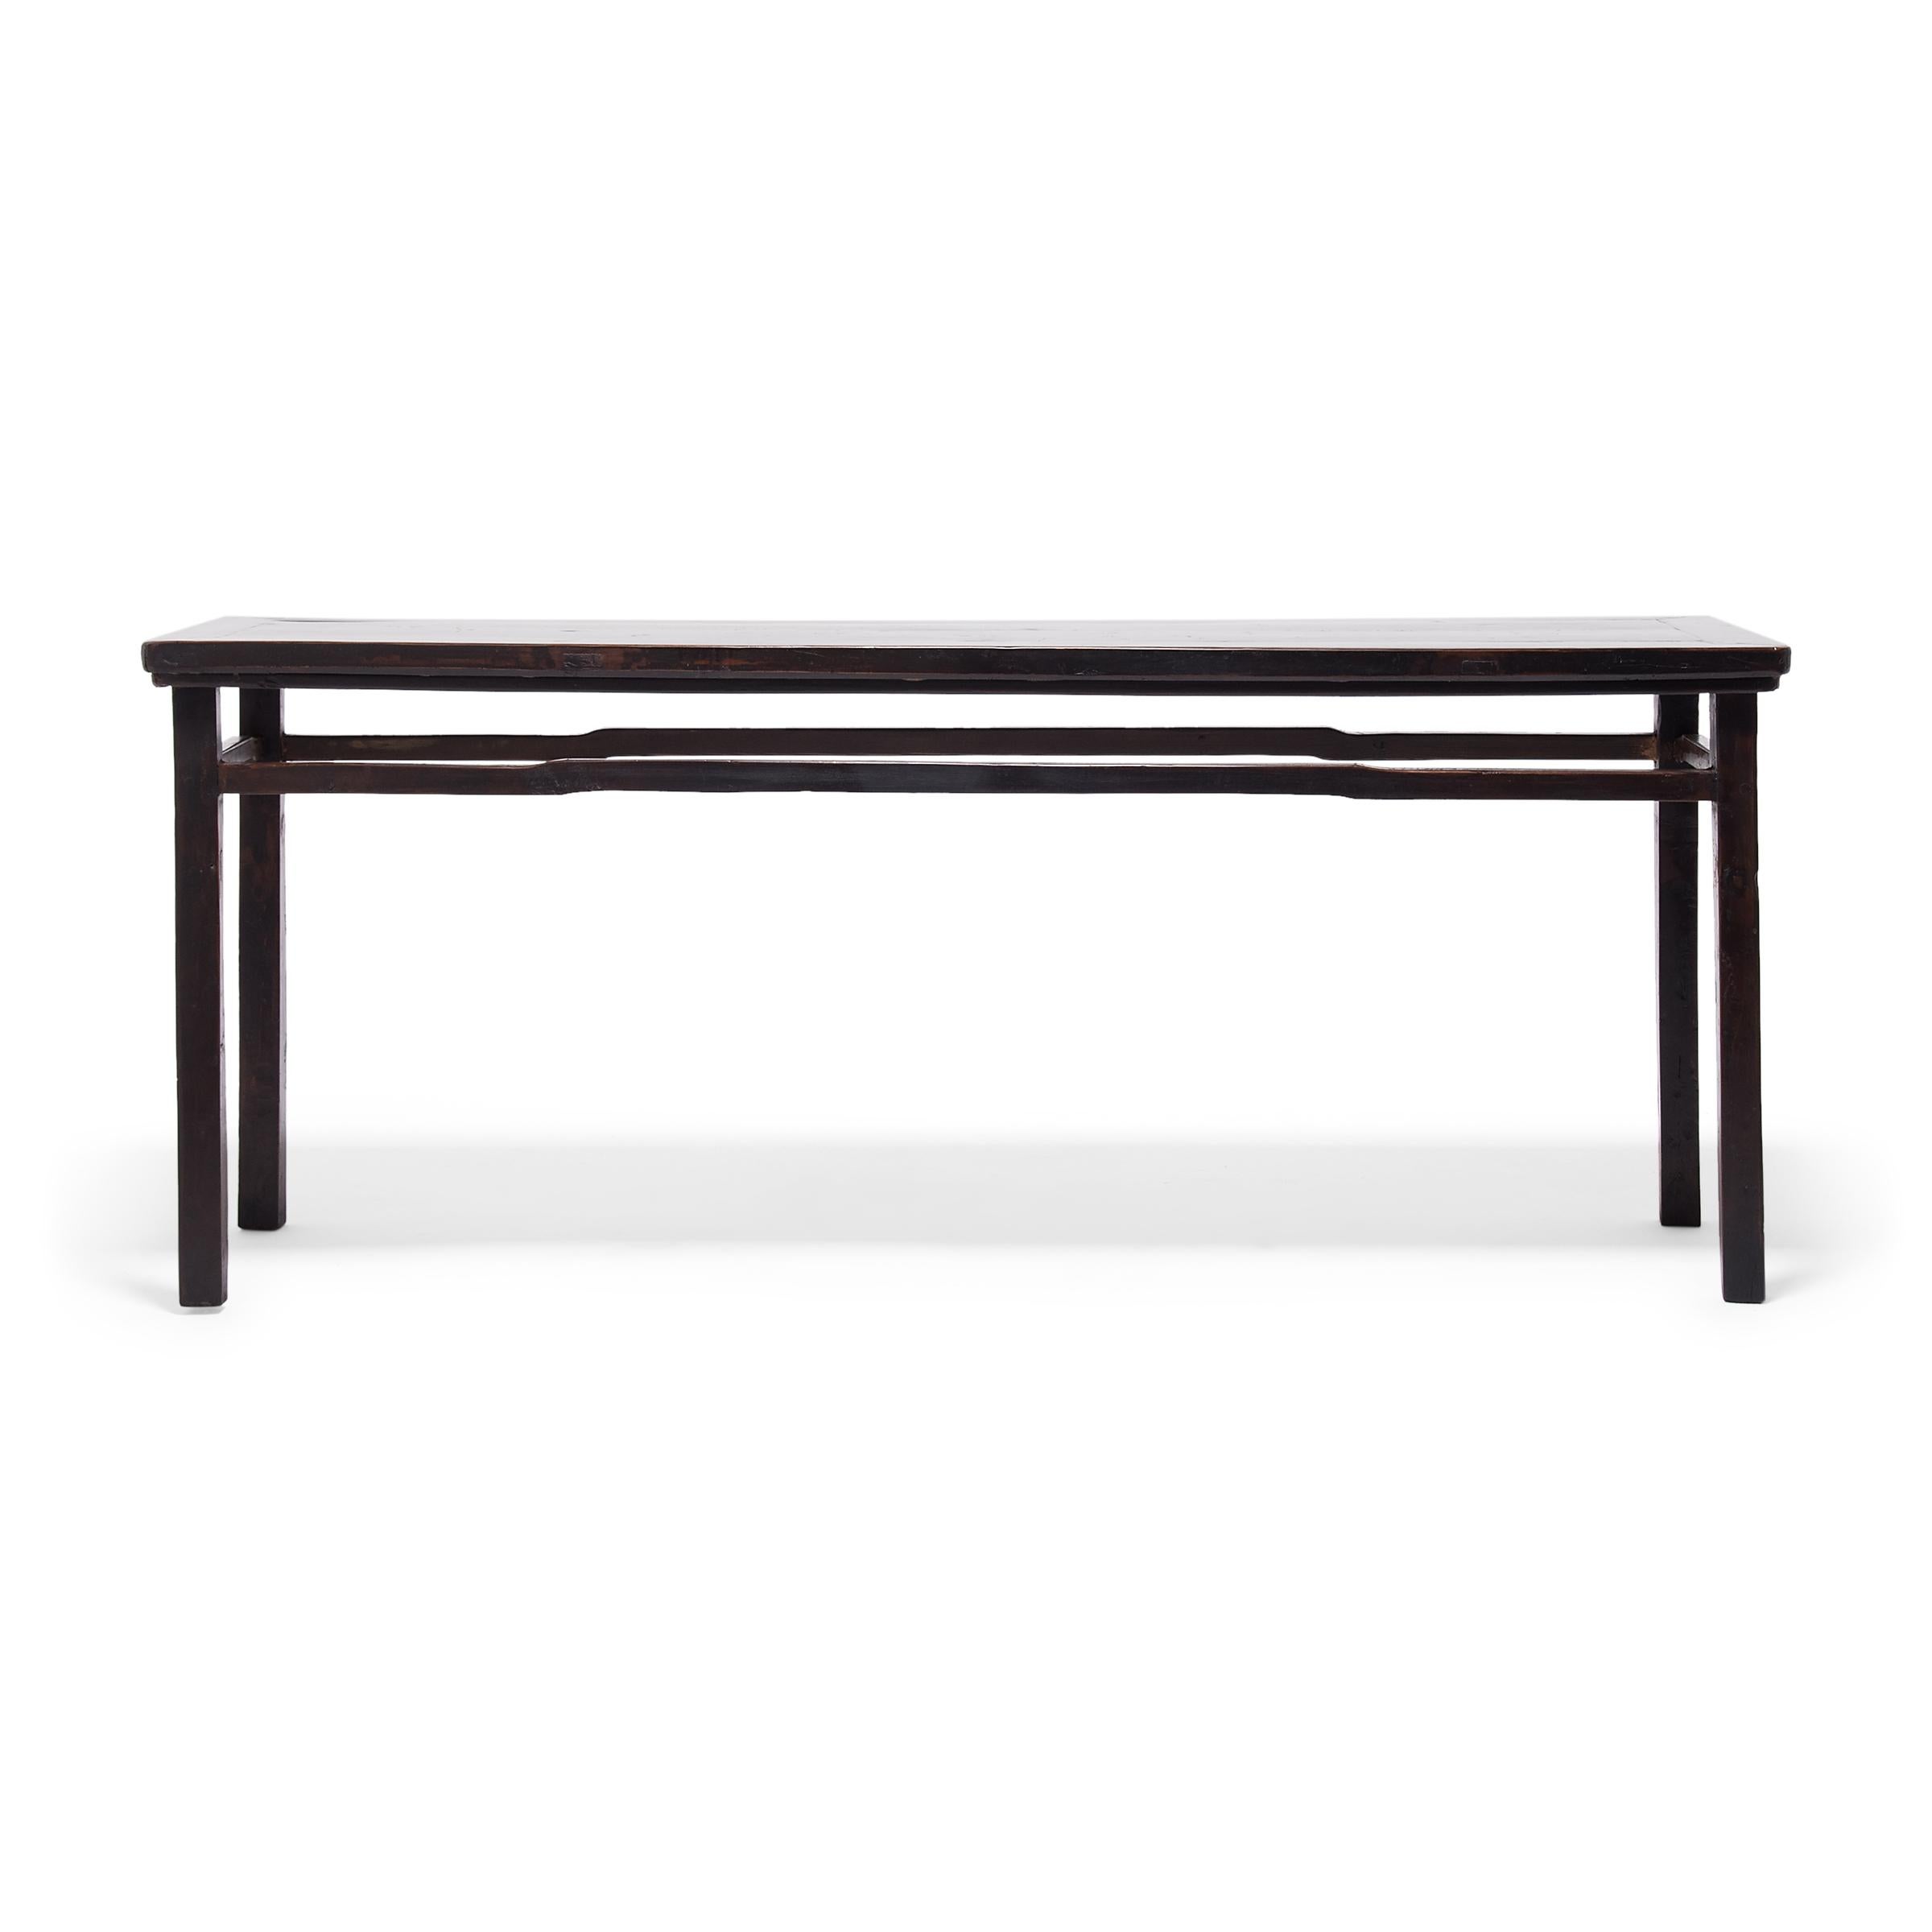 Dated to the early 20th century, this long table has a Minimalist appeal, with clean lines and a darkly lacquered finish. The walnut table exemplifies Classic Chinese furniture design and features an expansive floating-panel top, squared legs, and